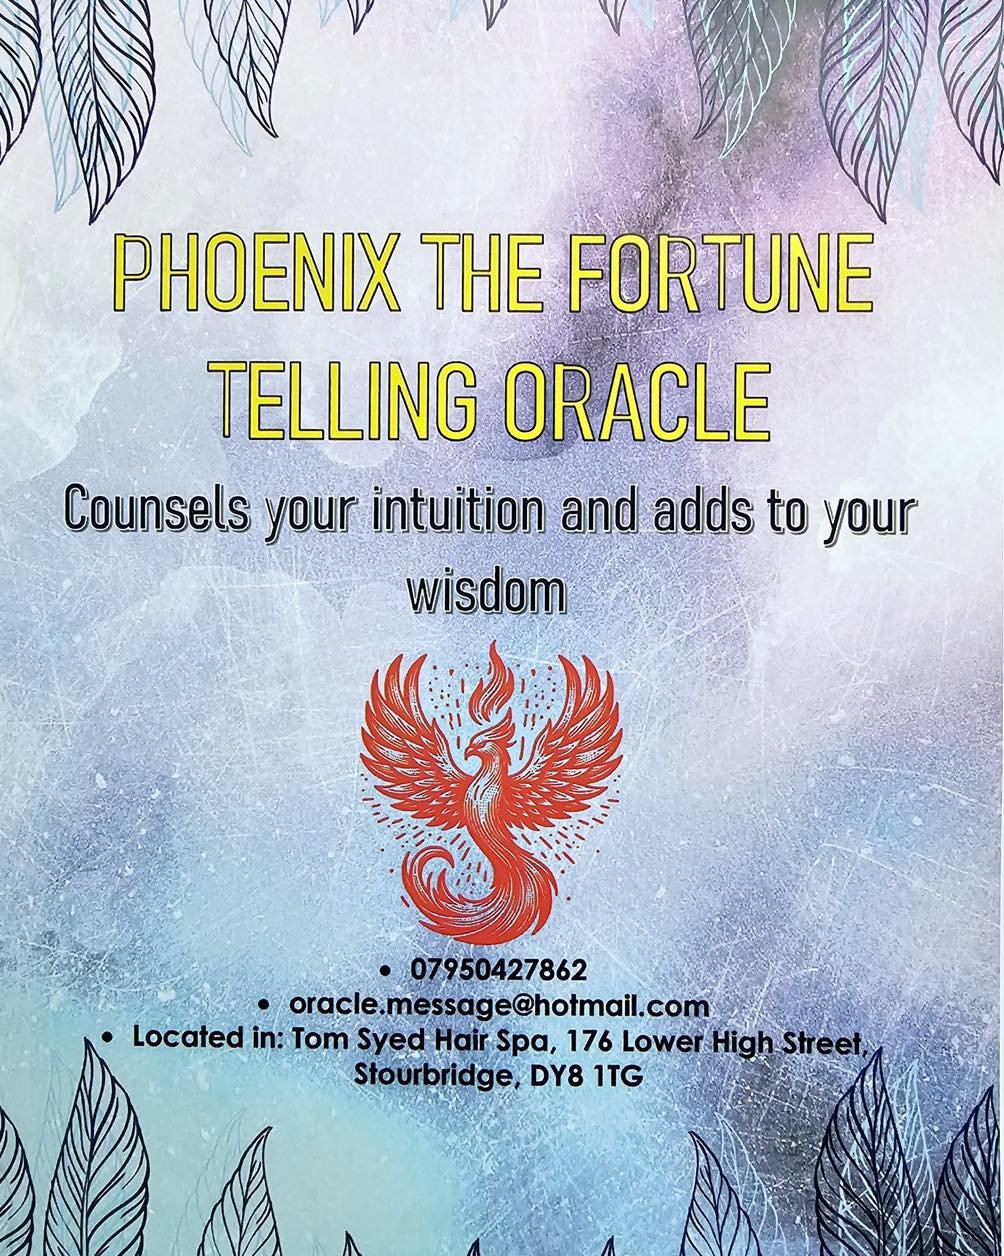 We are very excited to announce that we have Phoenix the Oracle with us now, nesting in our salon. 

She is a Psychic who tells your fortune in all life areas including your spiritual path. 

It is &pound;25 for a 20 minute reading or &pound;50 for a